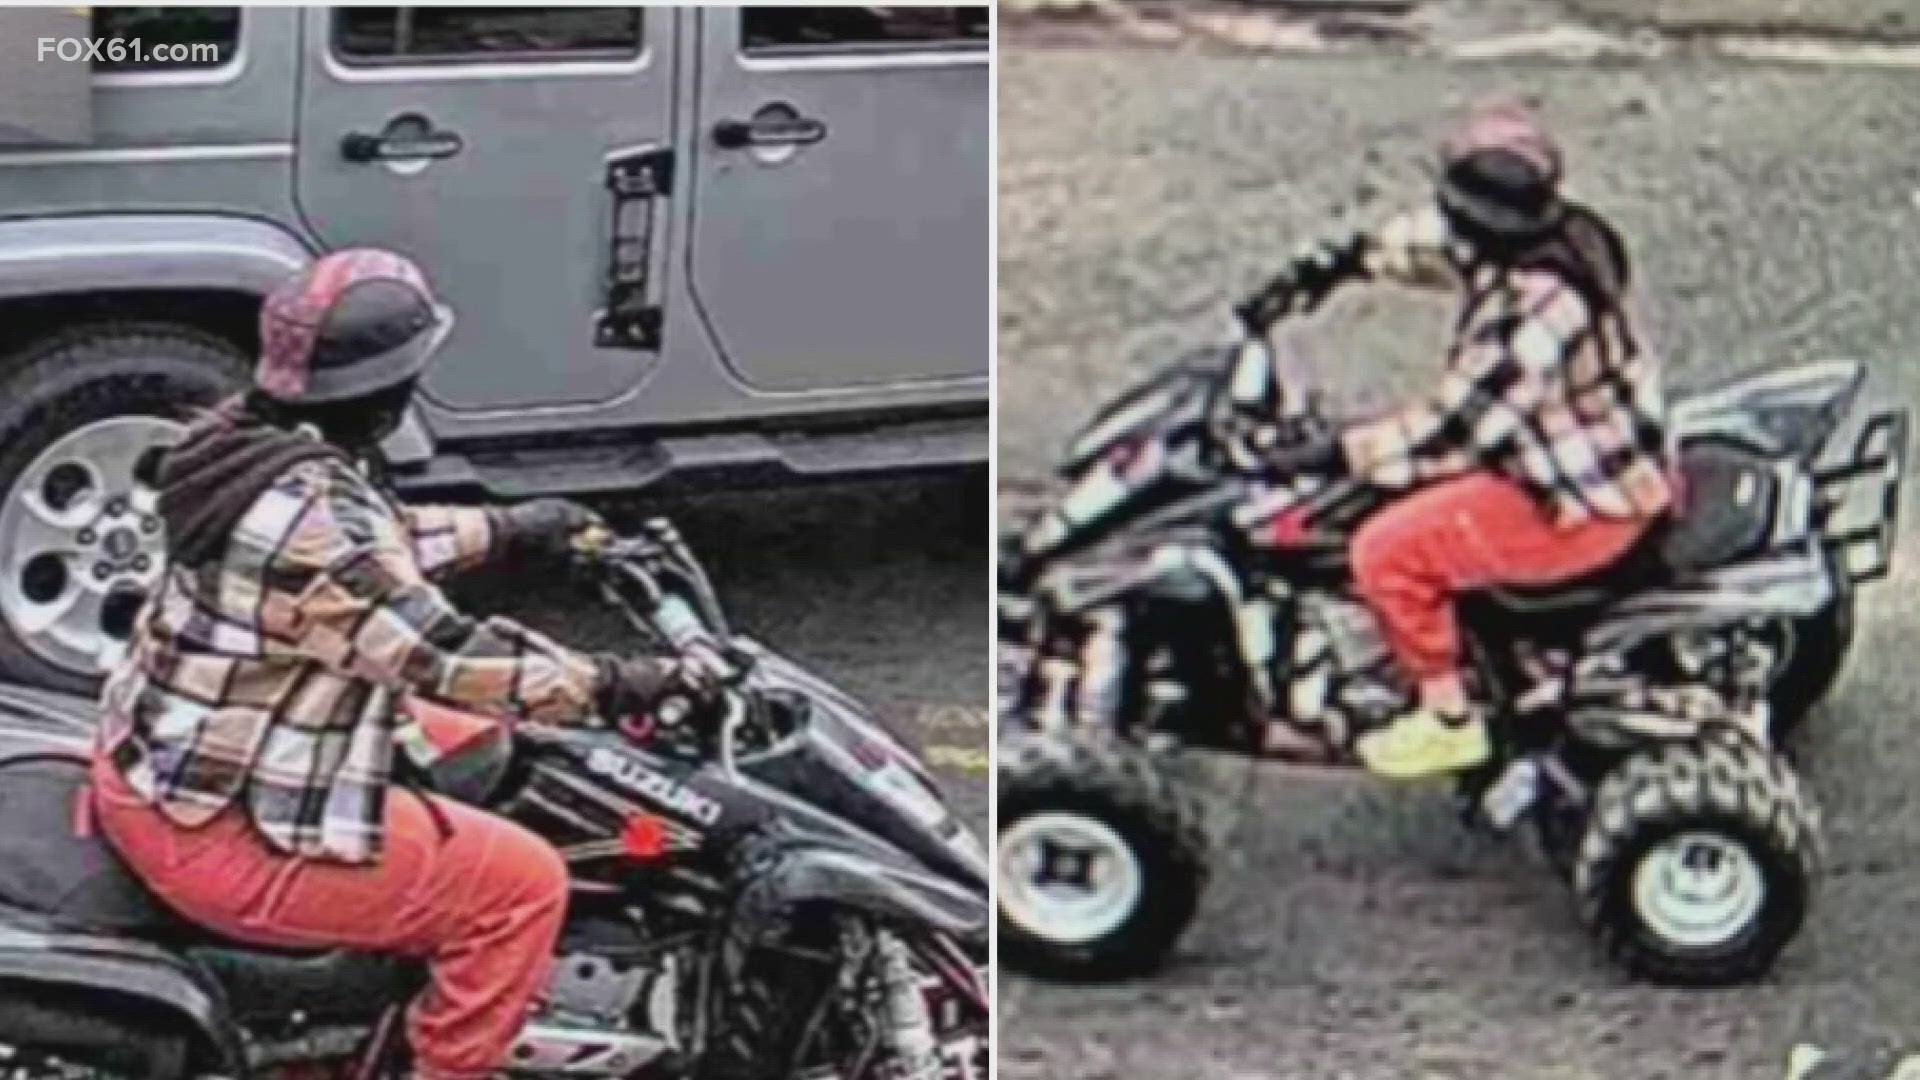 A woman in New Haven allegedly ran over a police officer on Sunday with an ATV, breaking his leg. Police: around 40 people were illegally riding dirt bikes and ATVs.